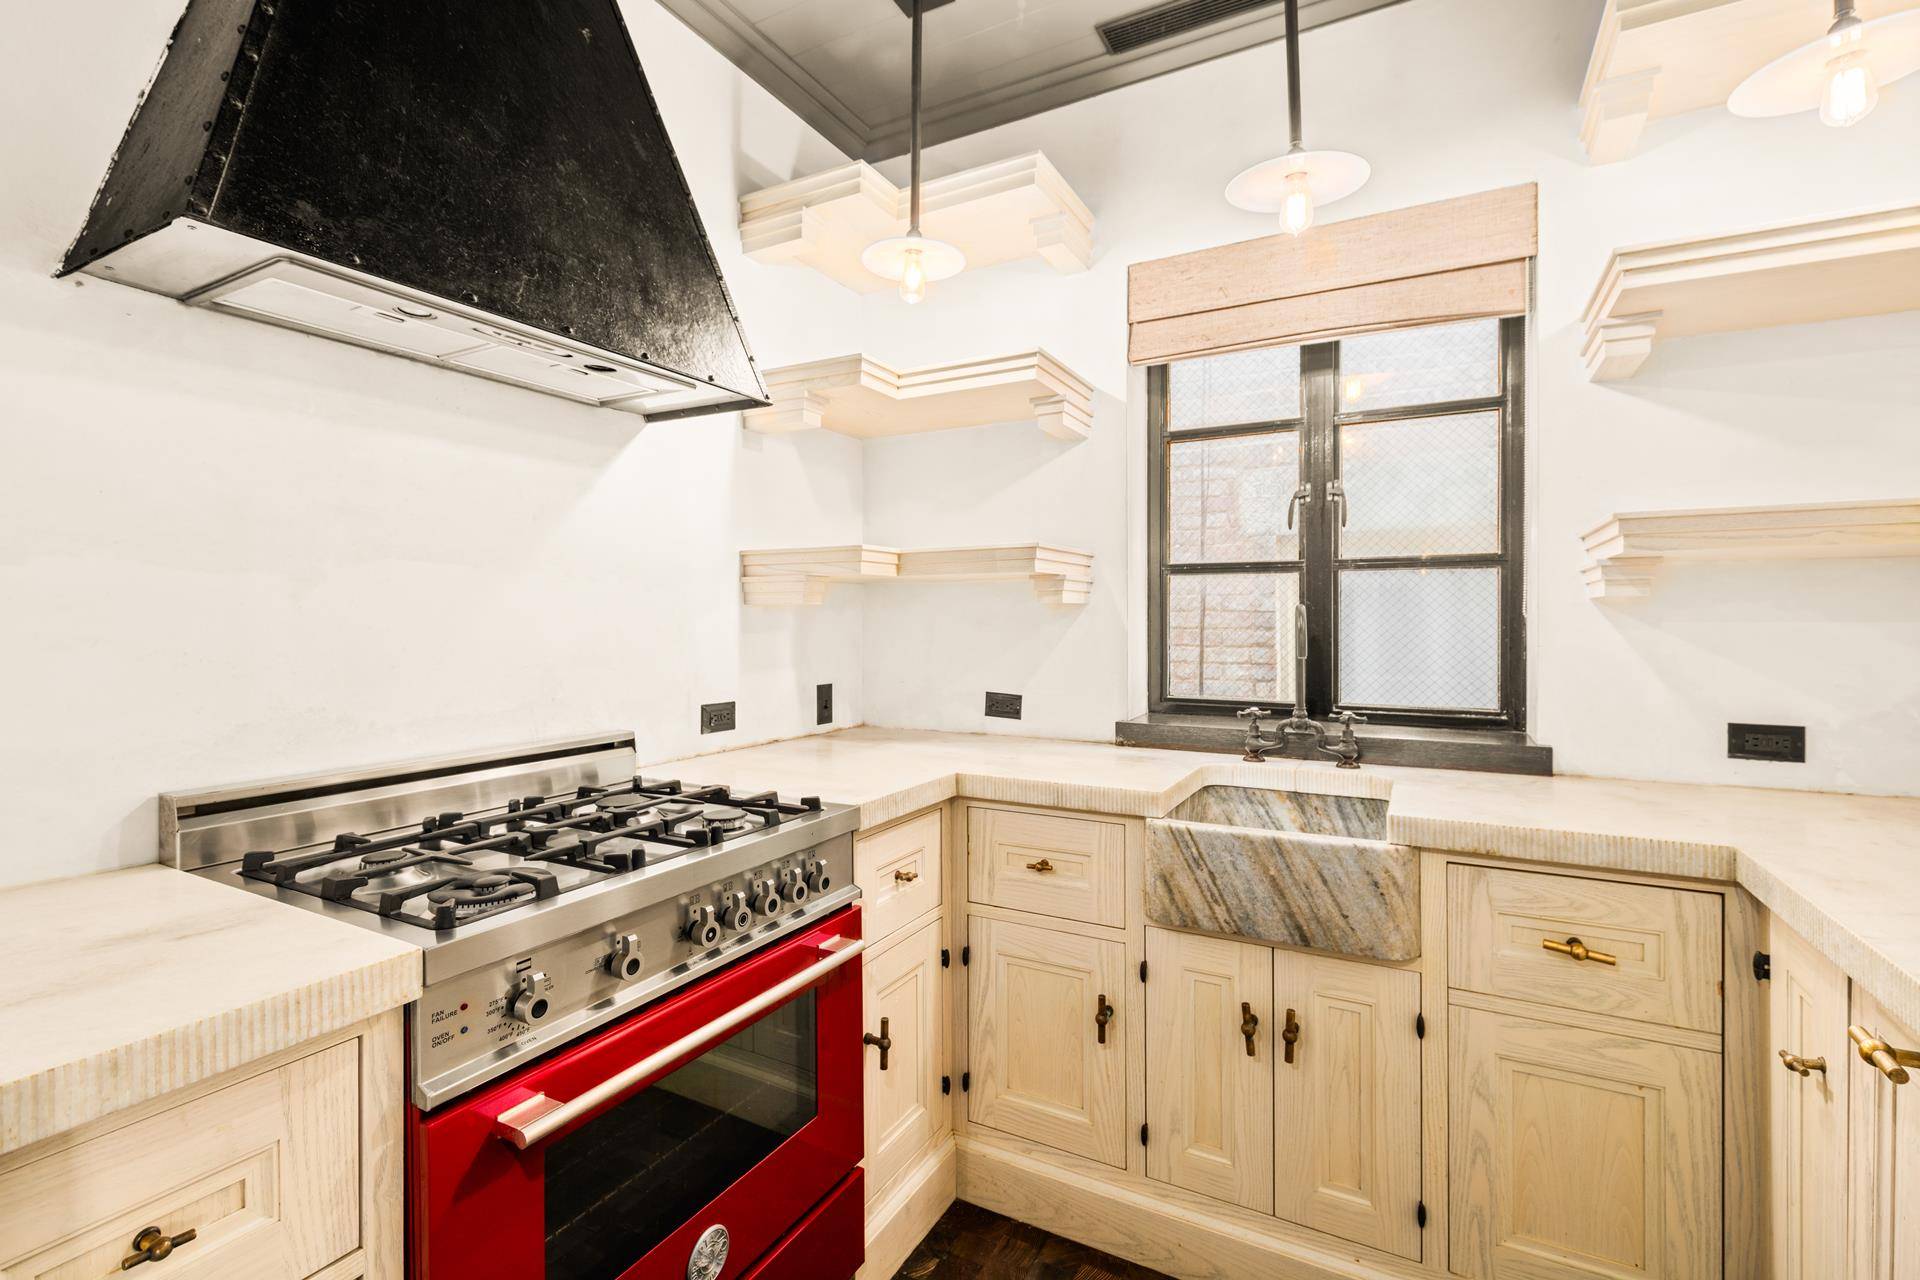 This West Village Townhouse duplex home is wonderful for live work and features 1 bedroom 1.